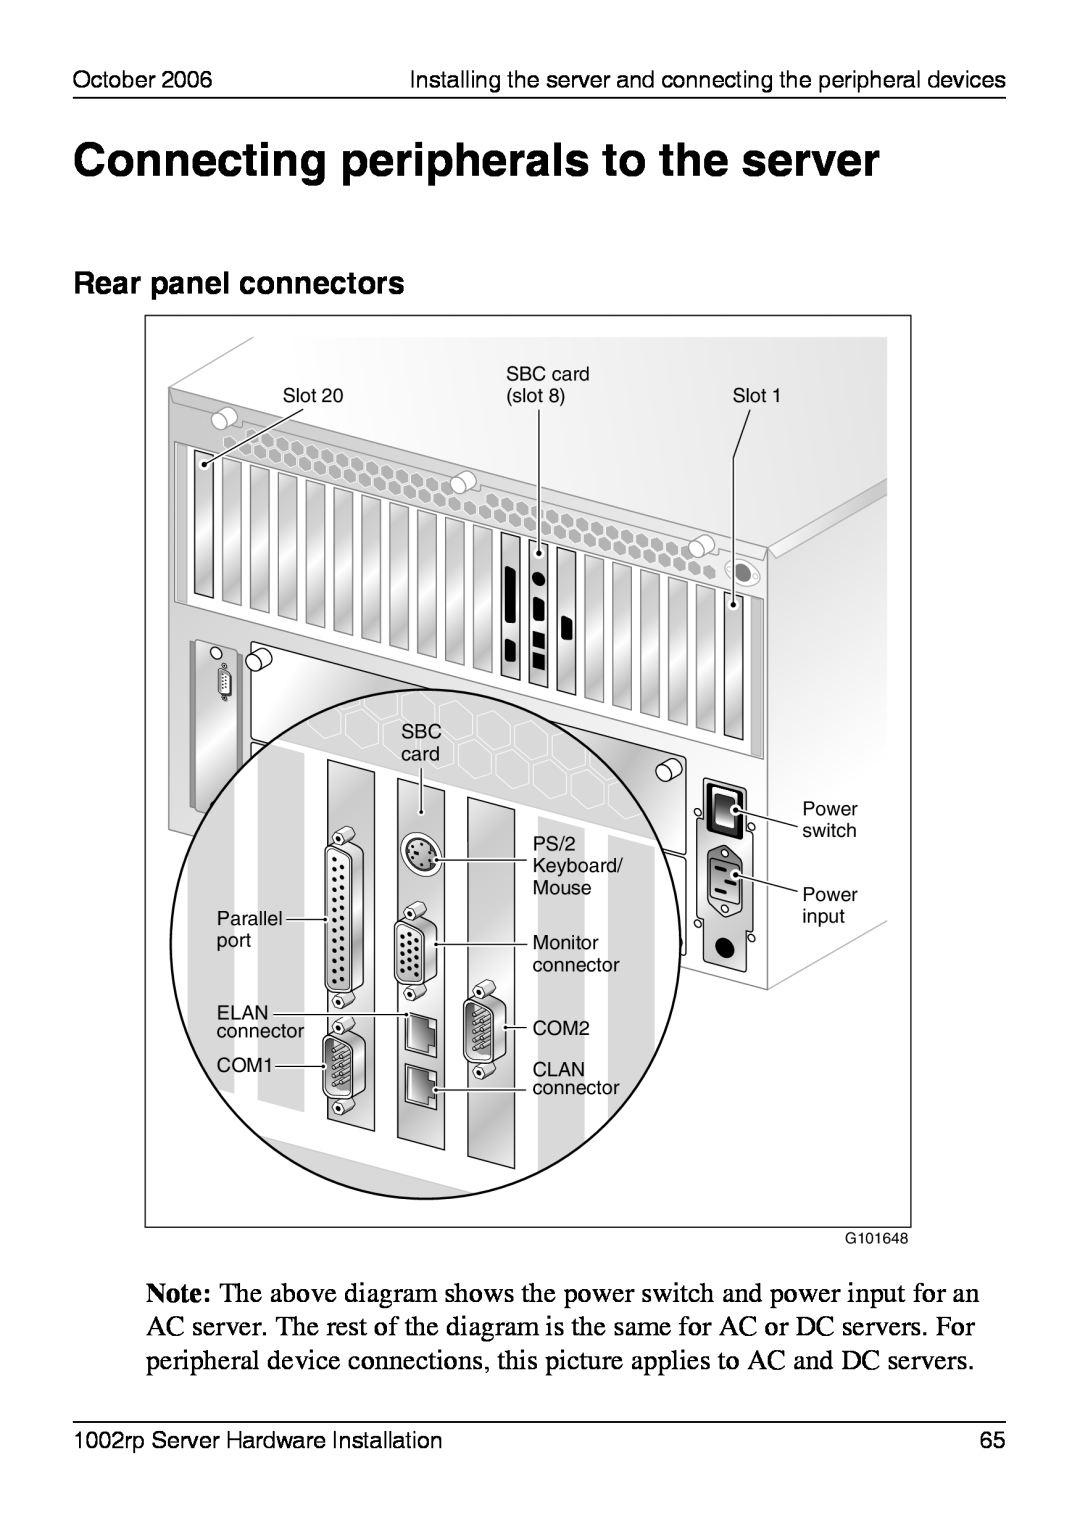 Nortel Networks 1002rp manual Connecting peripherals to the server, Rear panel connectors 